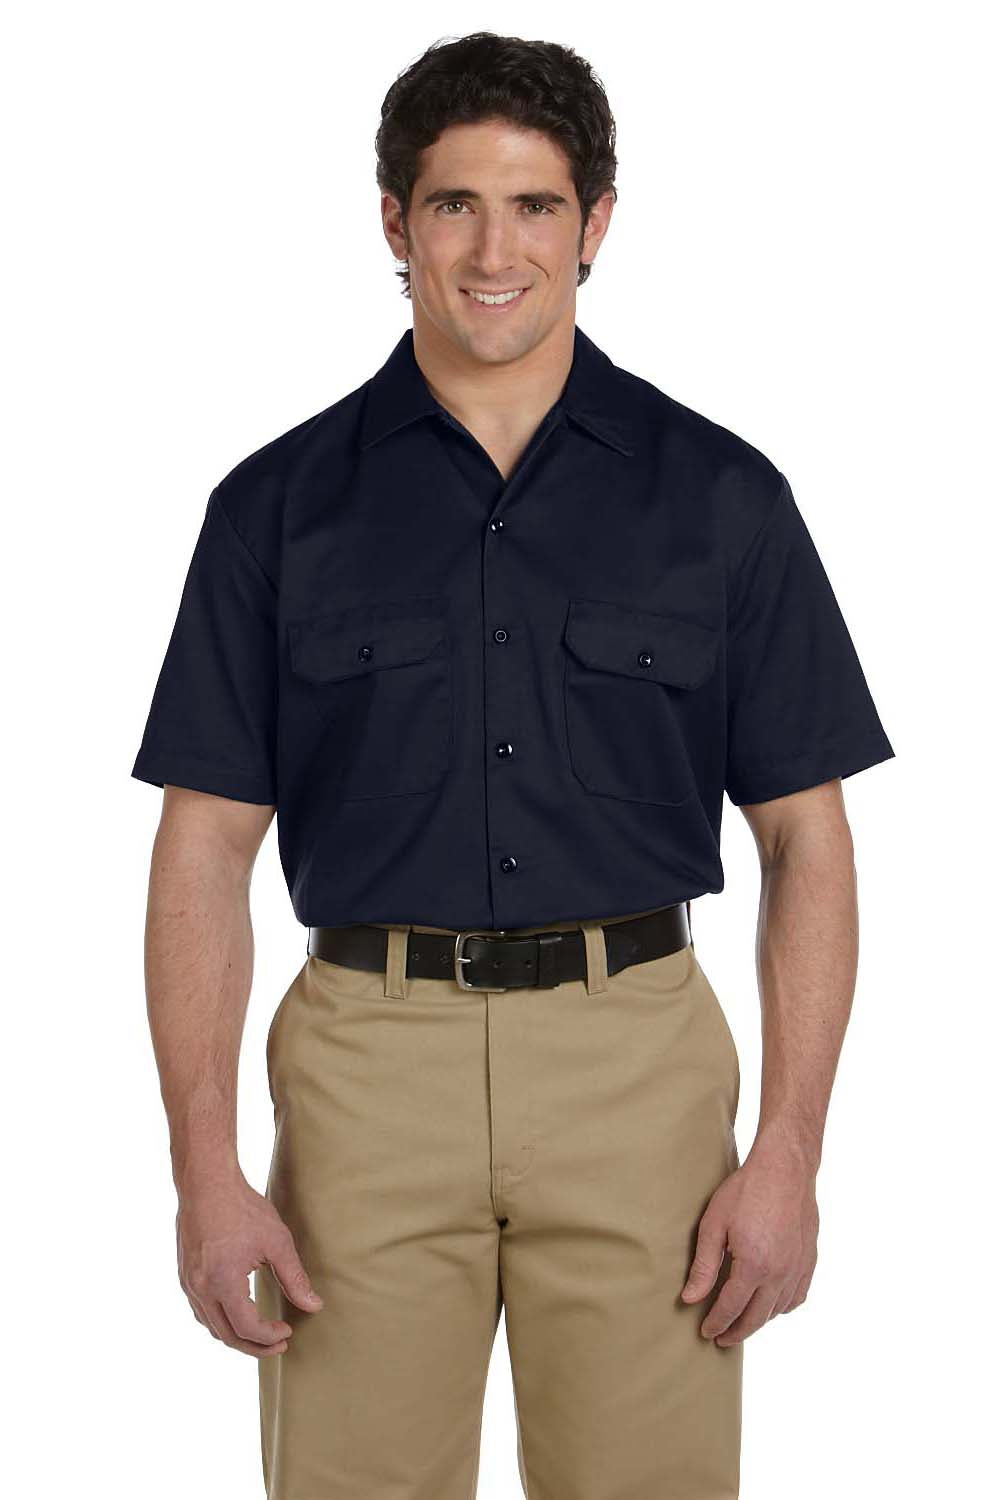 Dickies 1574 Mens Moisture Wicking Short Sleeve Button Down Shirt w/ Double Pockets Navy Blue Front